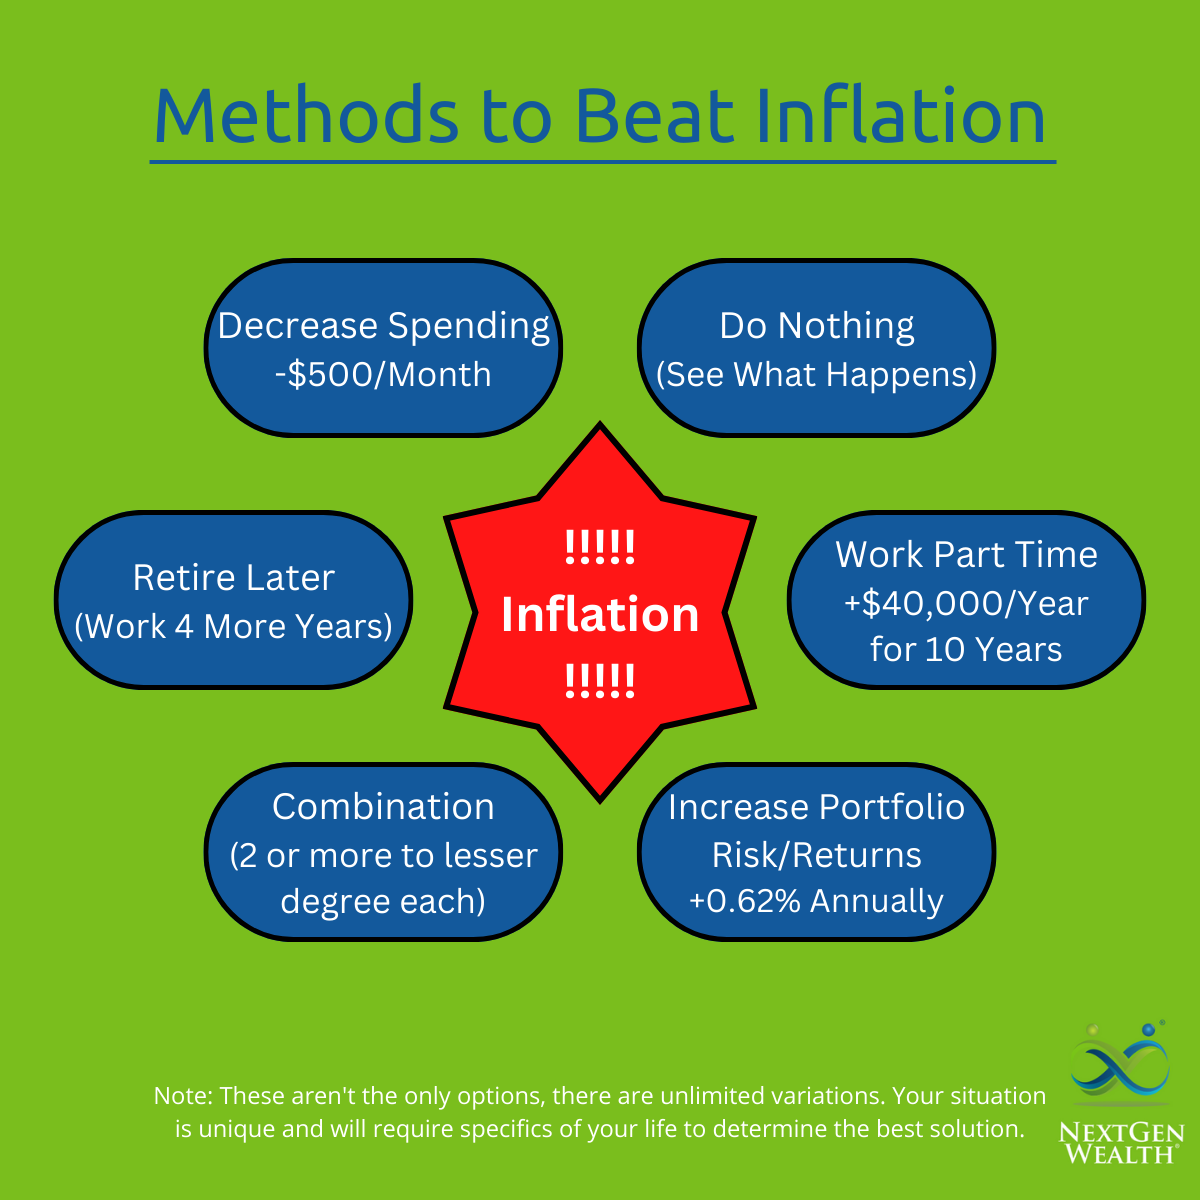 Methods to Beat Inflation